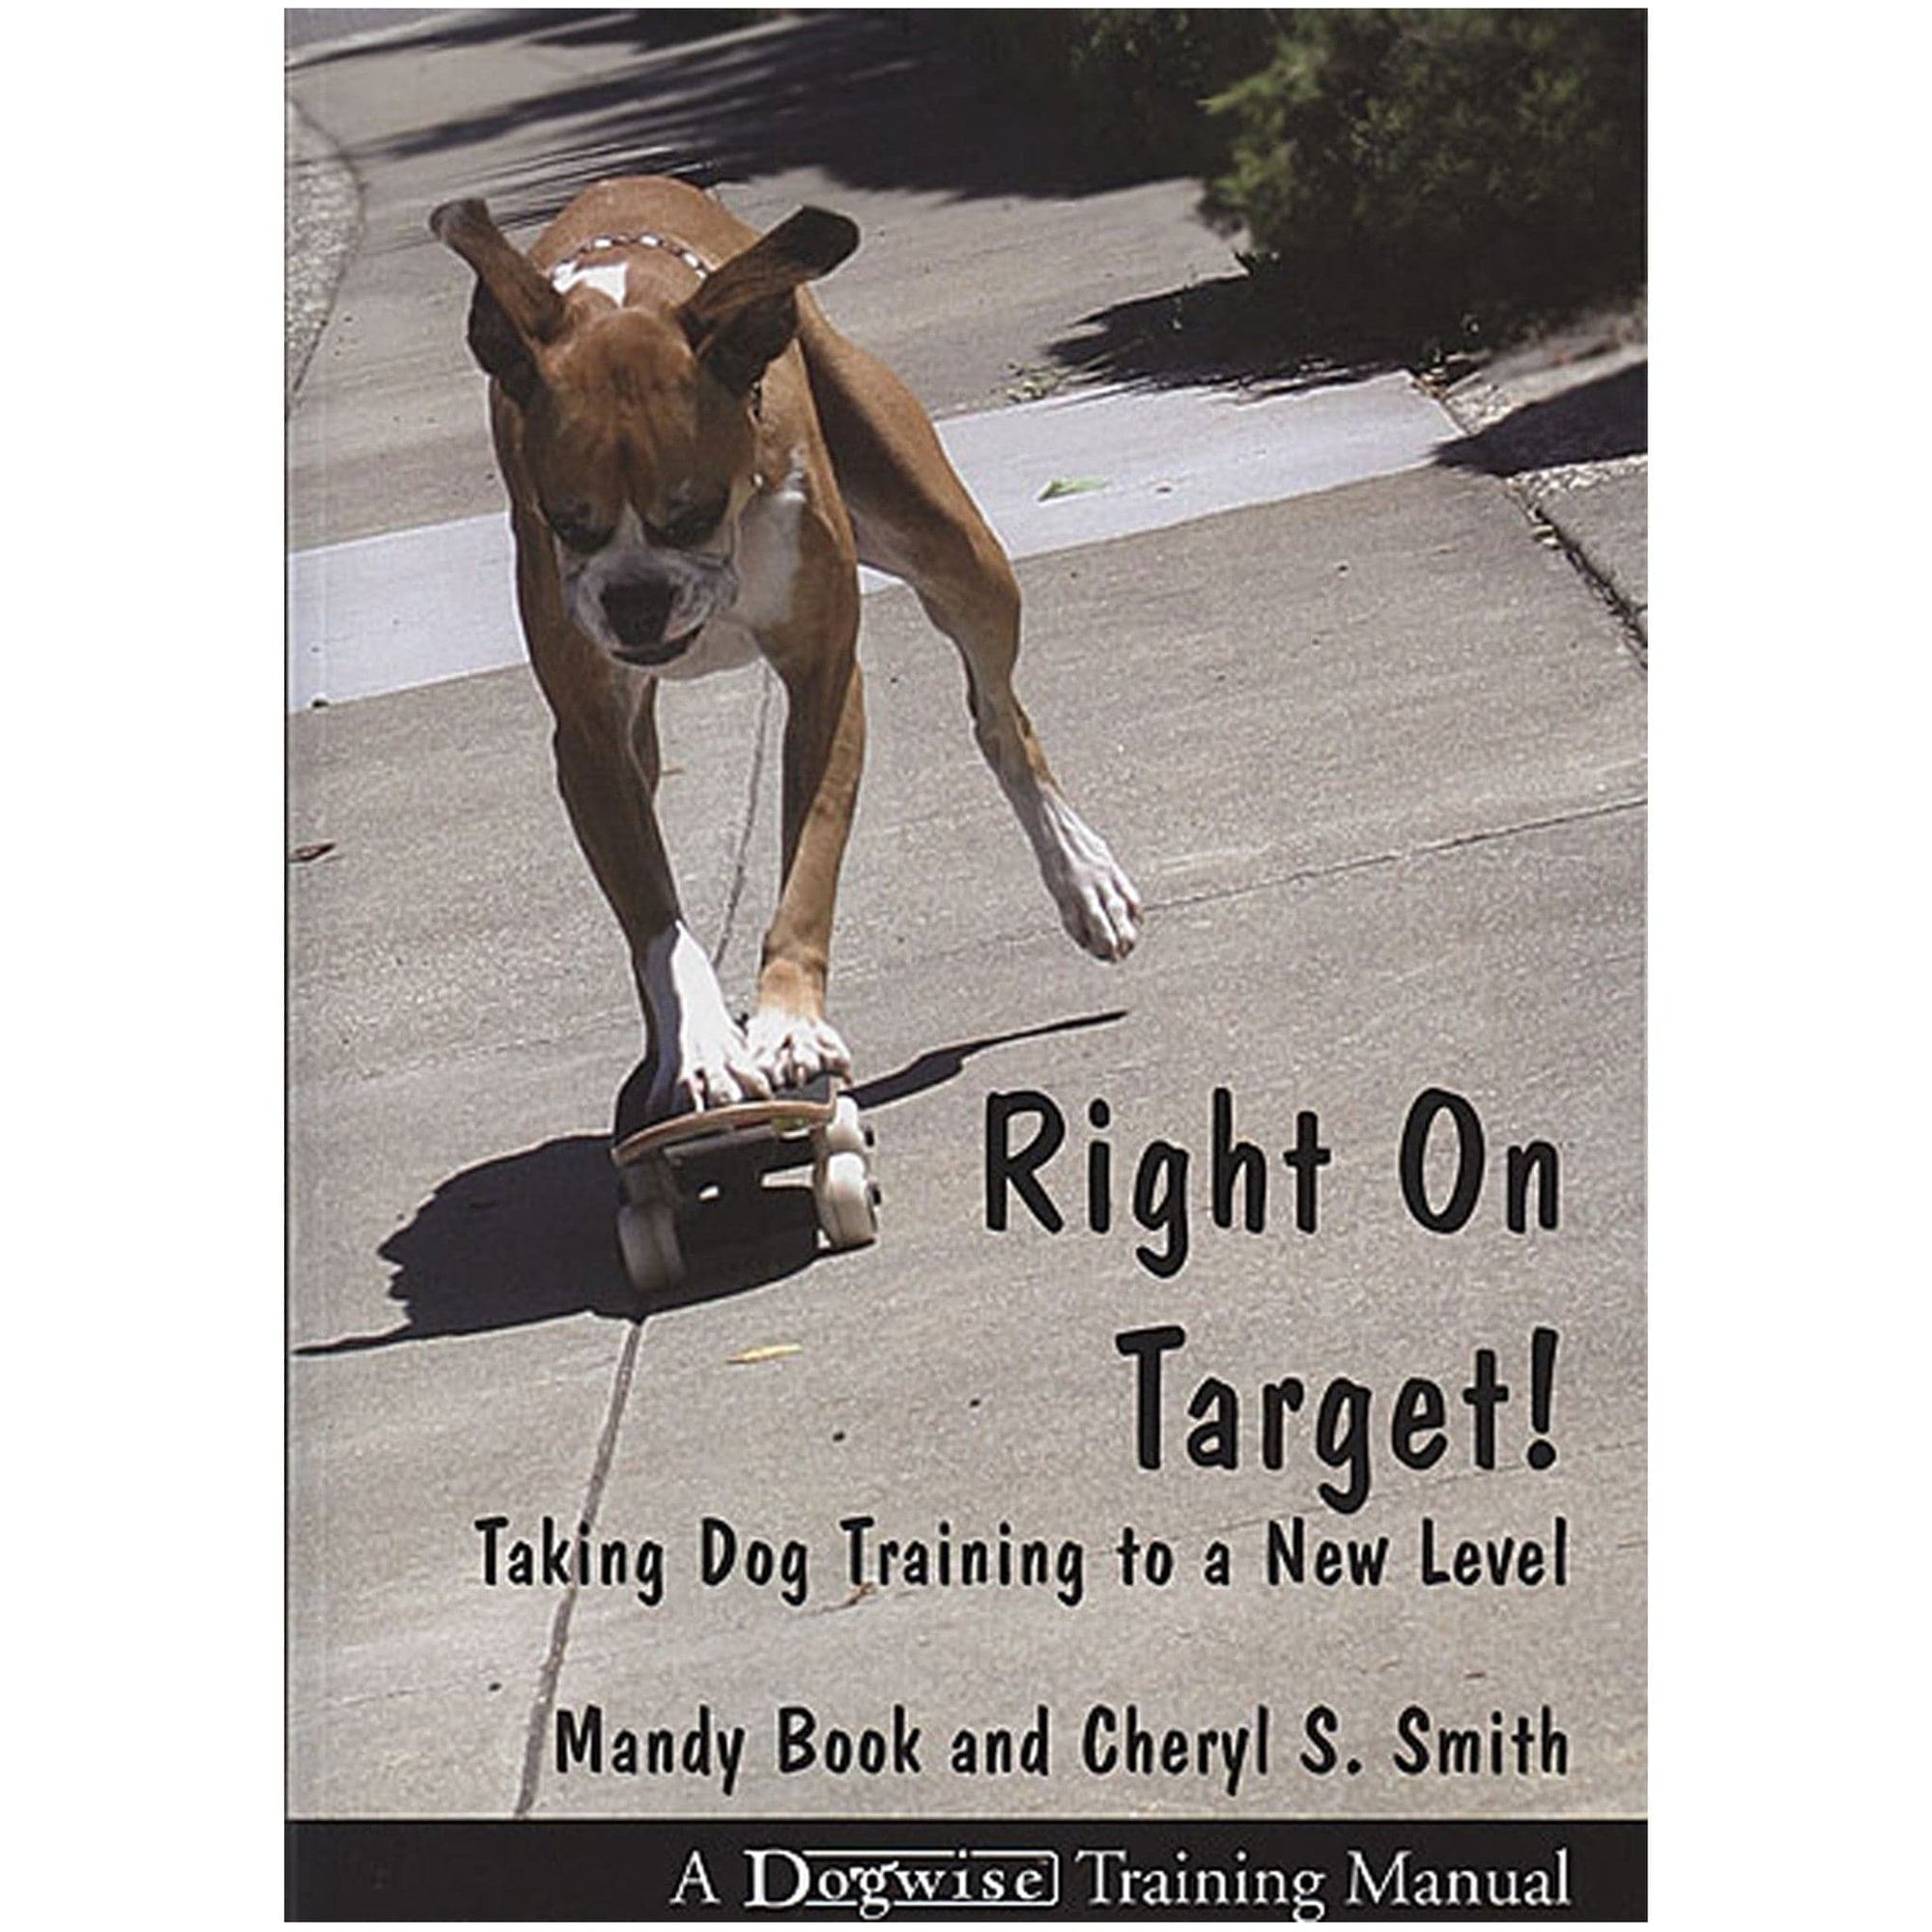 E-BOOK Right On Target! Taking Dog Training to a New Level by Mandy Book & Cheryl S. Smith